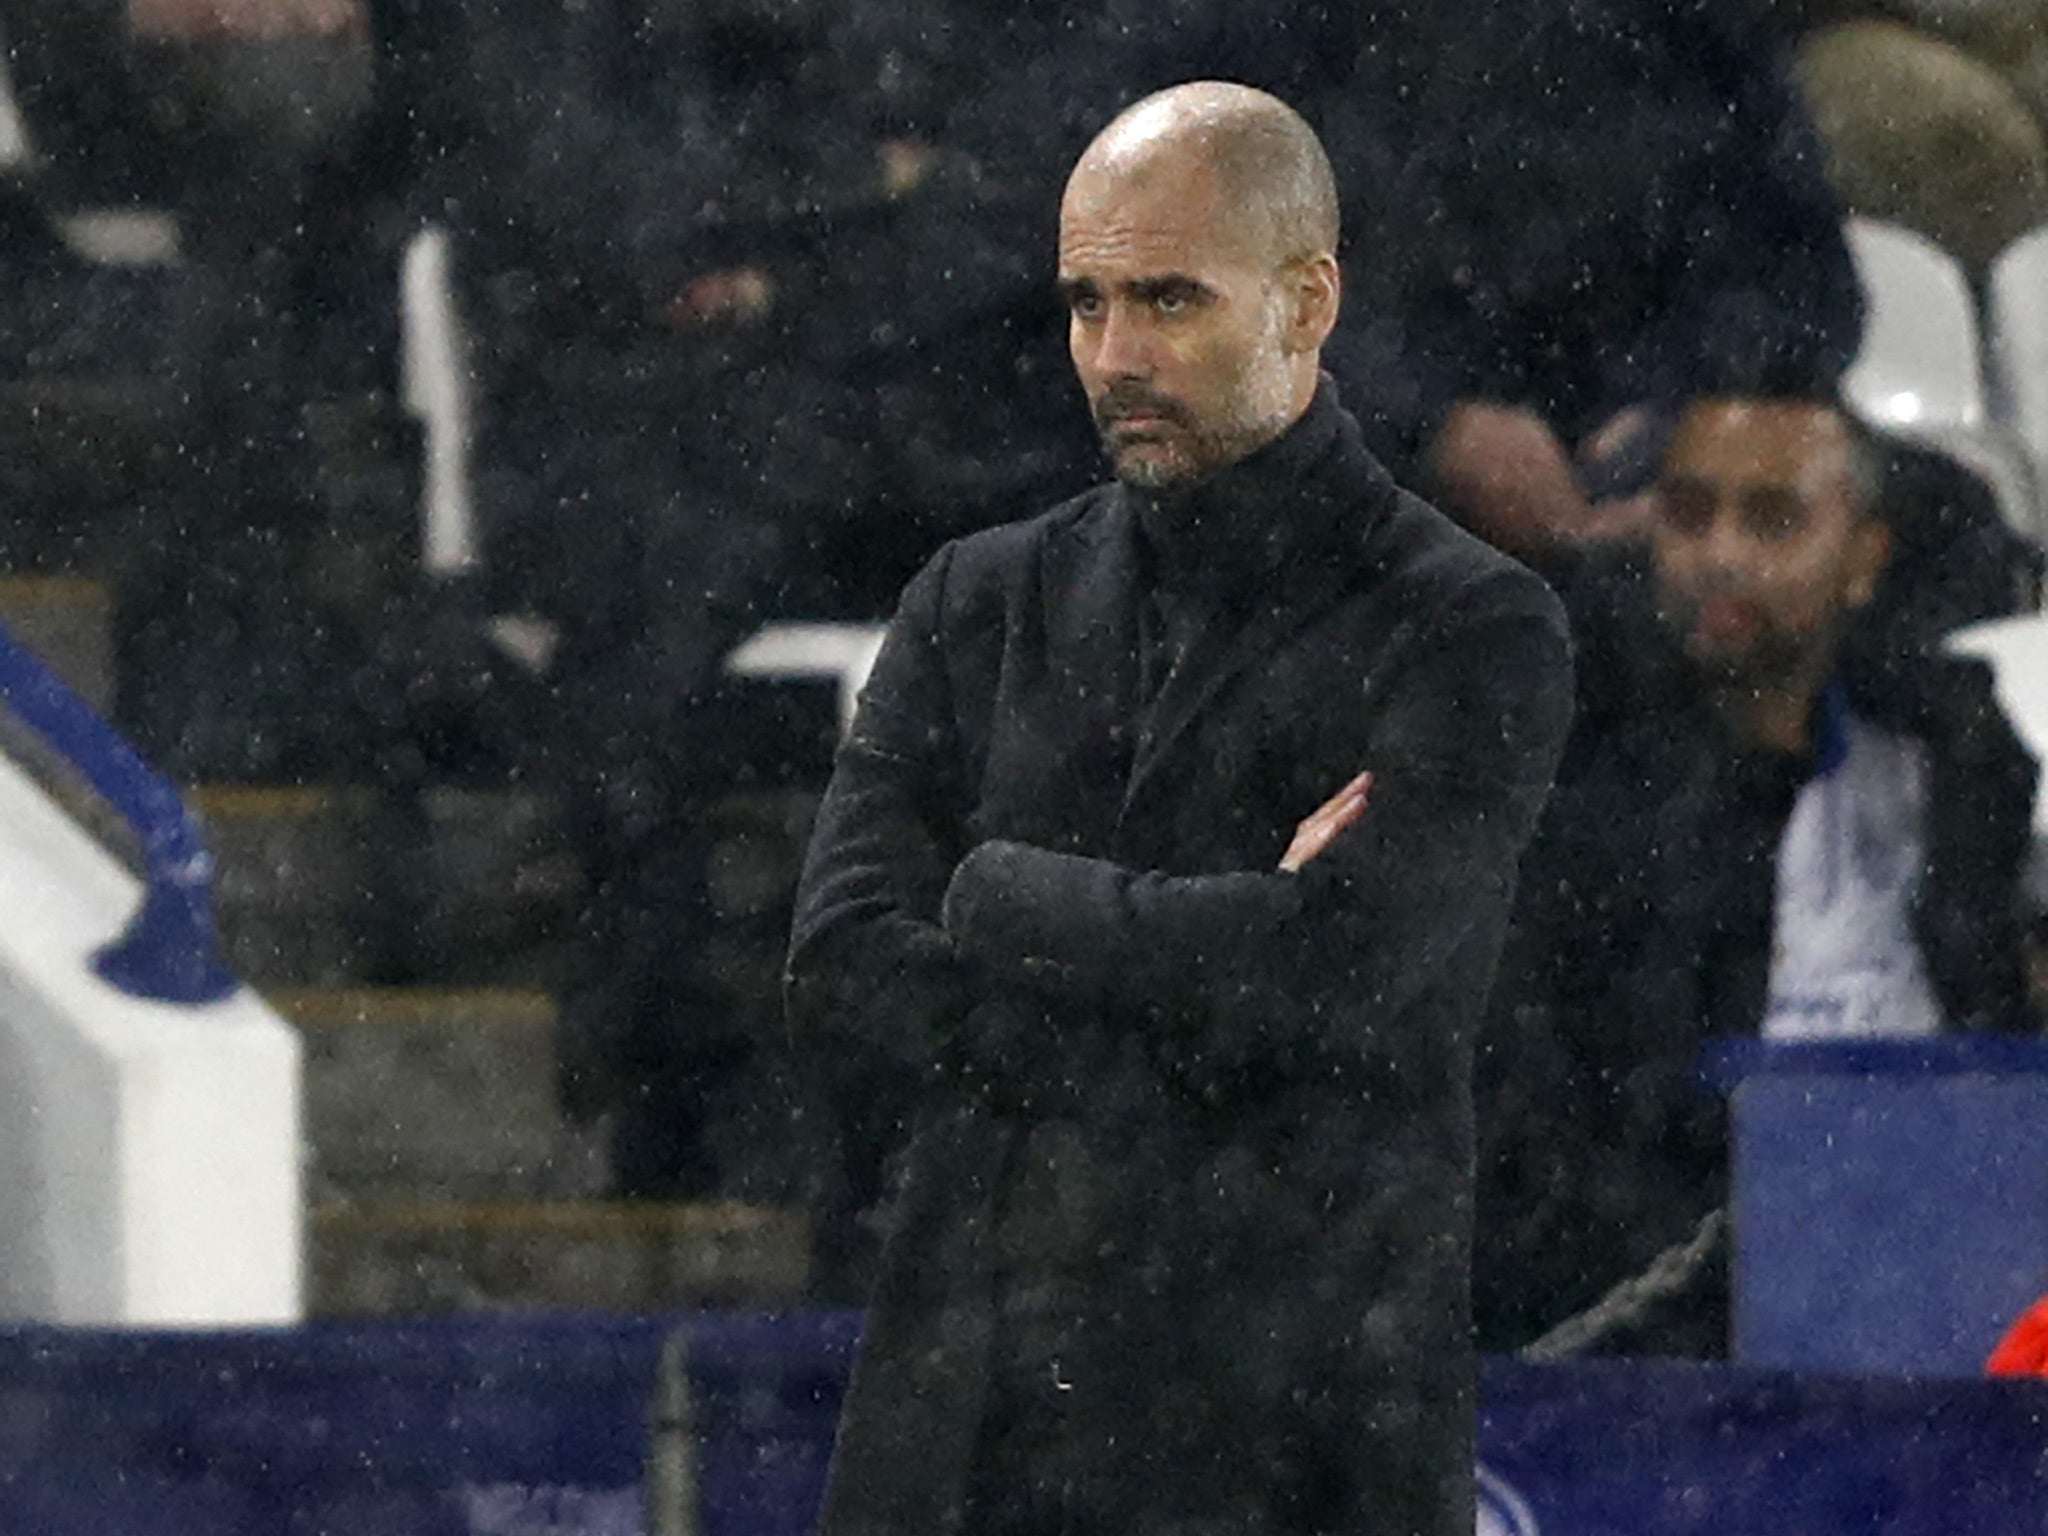 Guardiola provided a stubborn defence of his methods